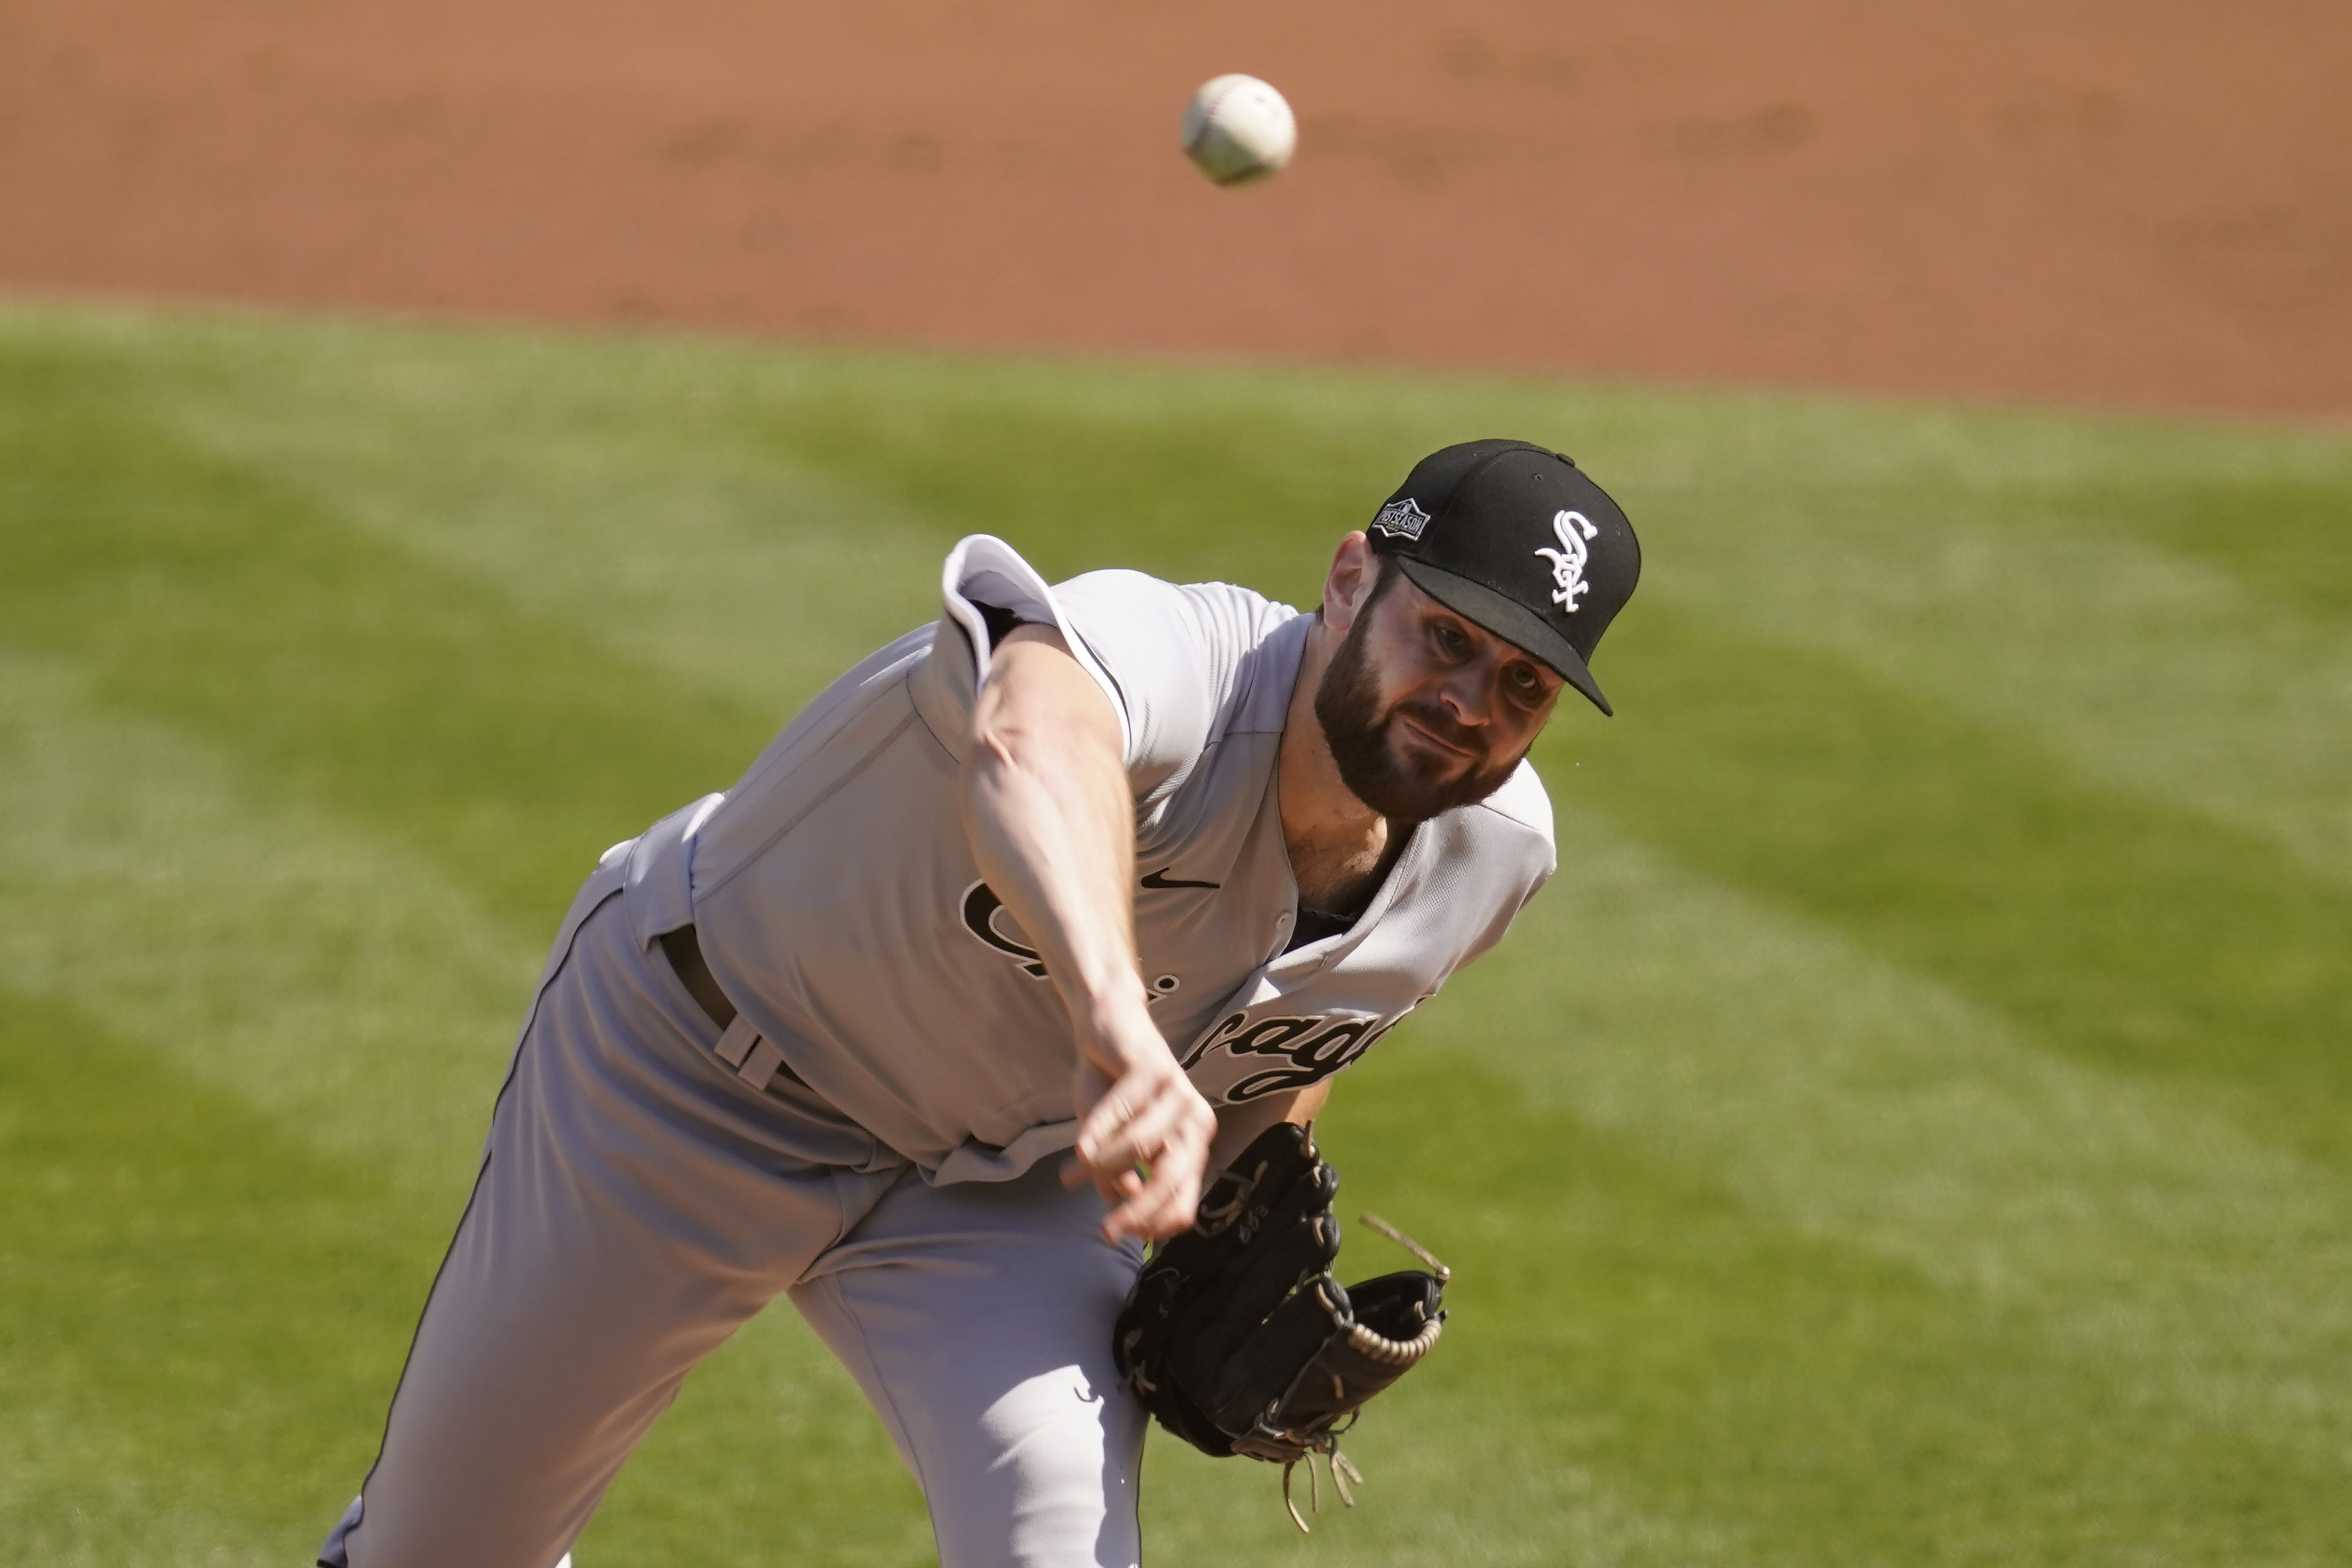 Lucas Giolito Pitches 6 Hitless Innings in Chicago White Sox Win vs Yankees